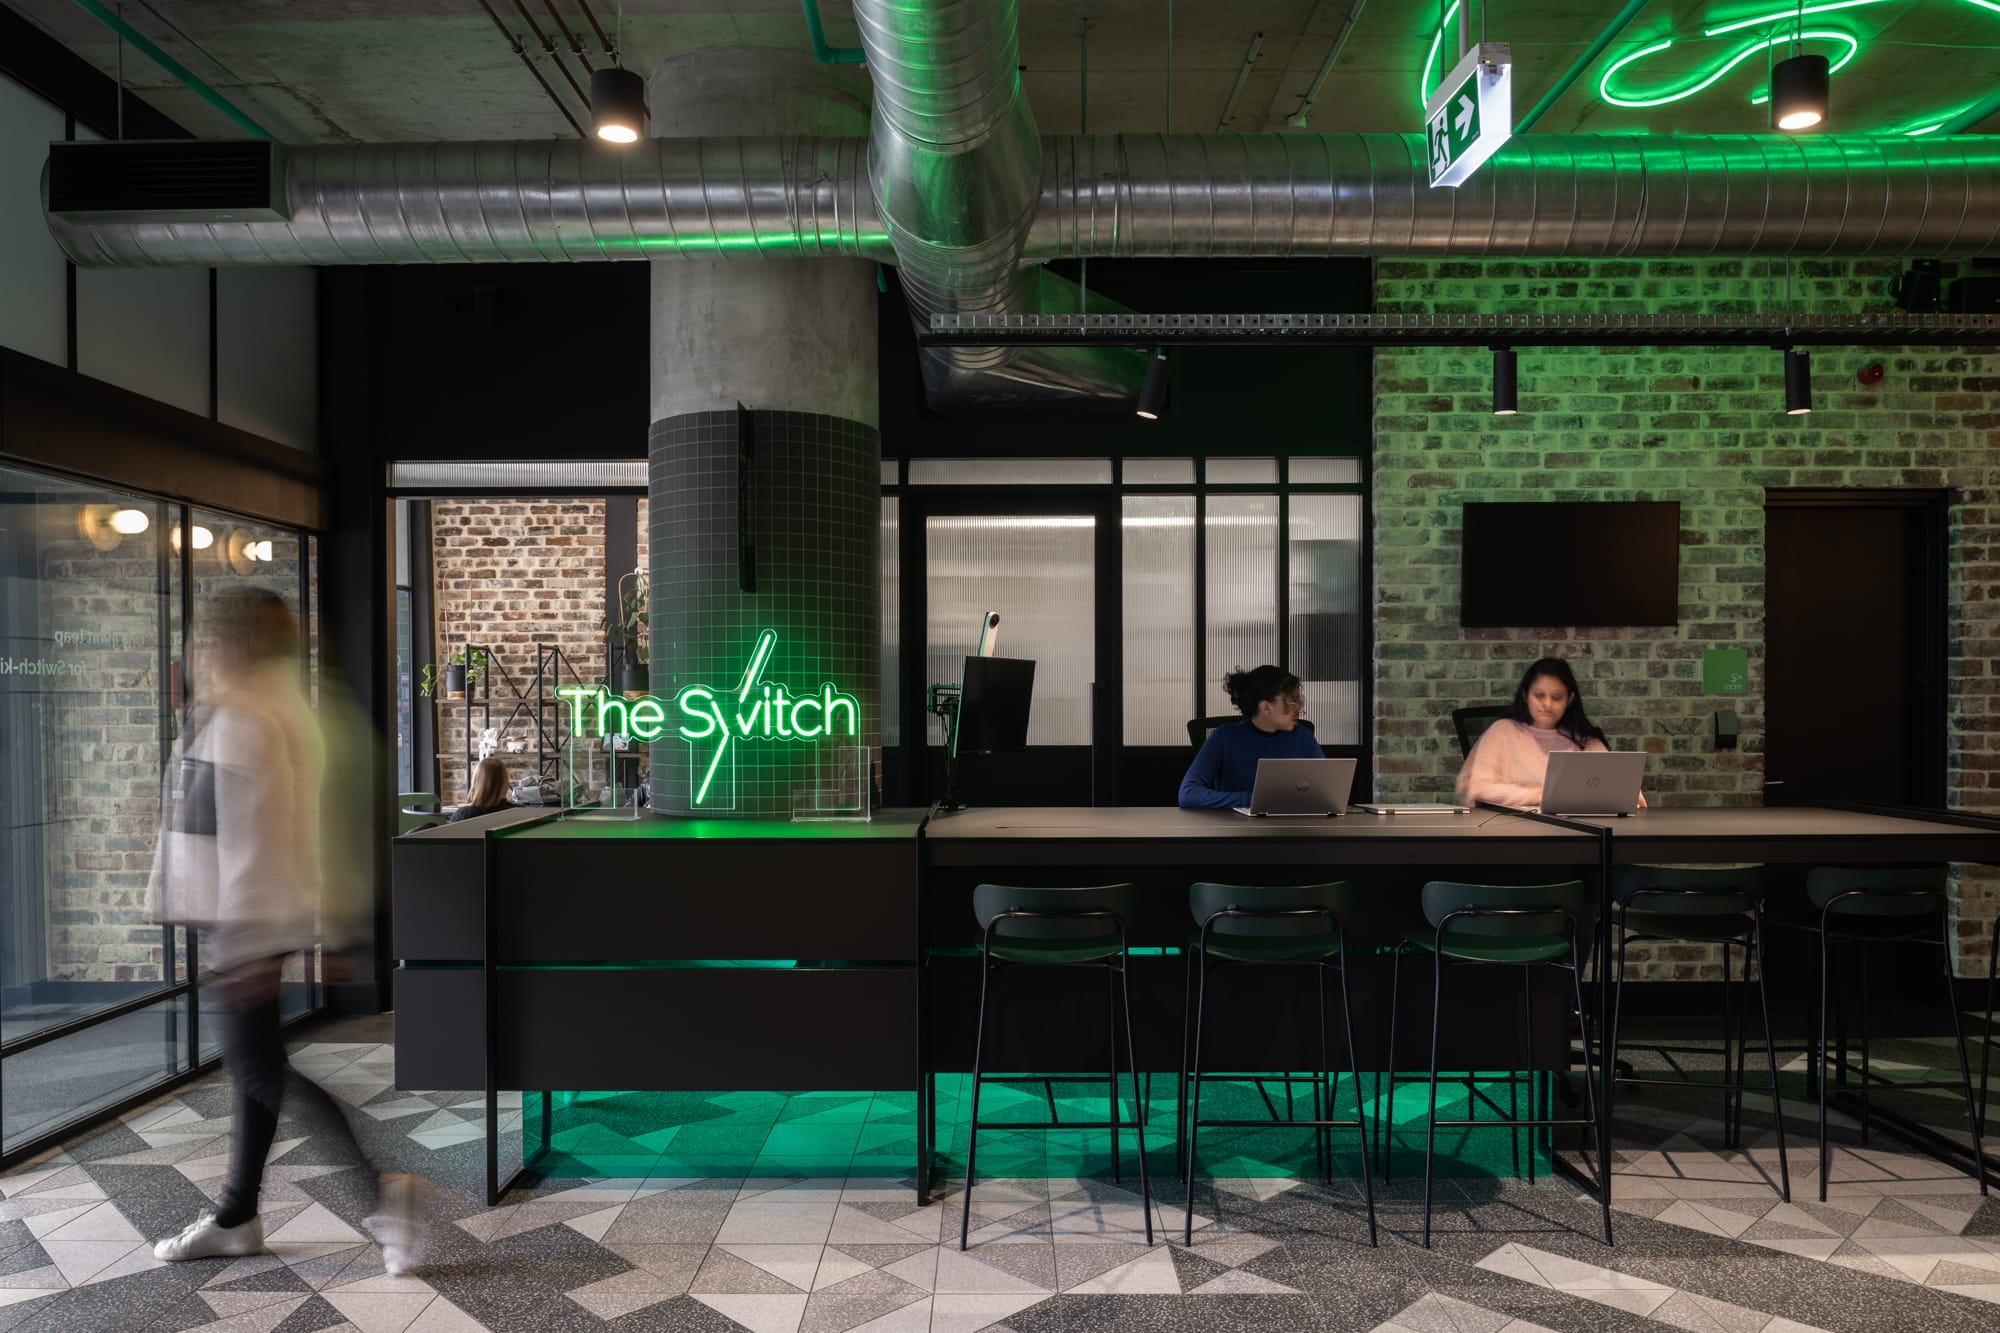 Thinking Differently About a Home Gives You Affordable ChoicesAn urban workspace with a green color theme, highlighted by a neon sign saying "The Switch." People are working at bar-style seating against a backdrop of green-painted brick walls and industrial-style lighting.